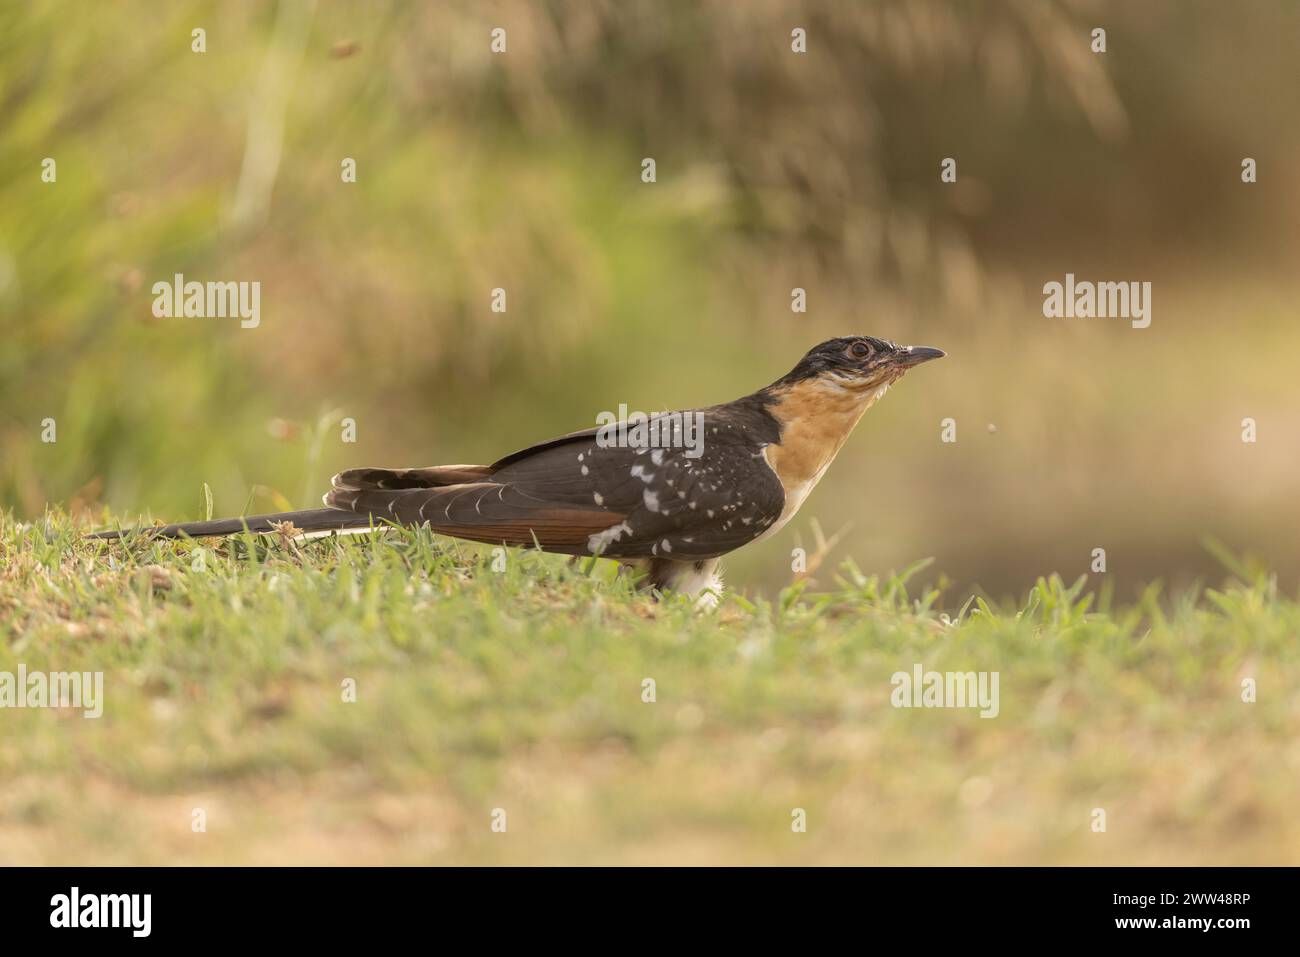 The great spotted cuckoo (Clamator glandarius) is a member of the cuckoo order of birds, the Cuculiformes, It is widely spread throughout Africa and t Stock Photo